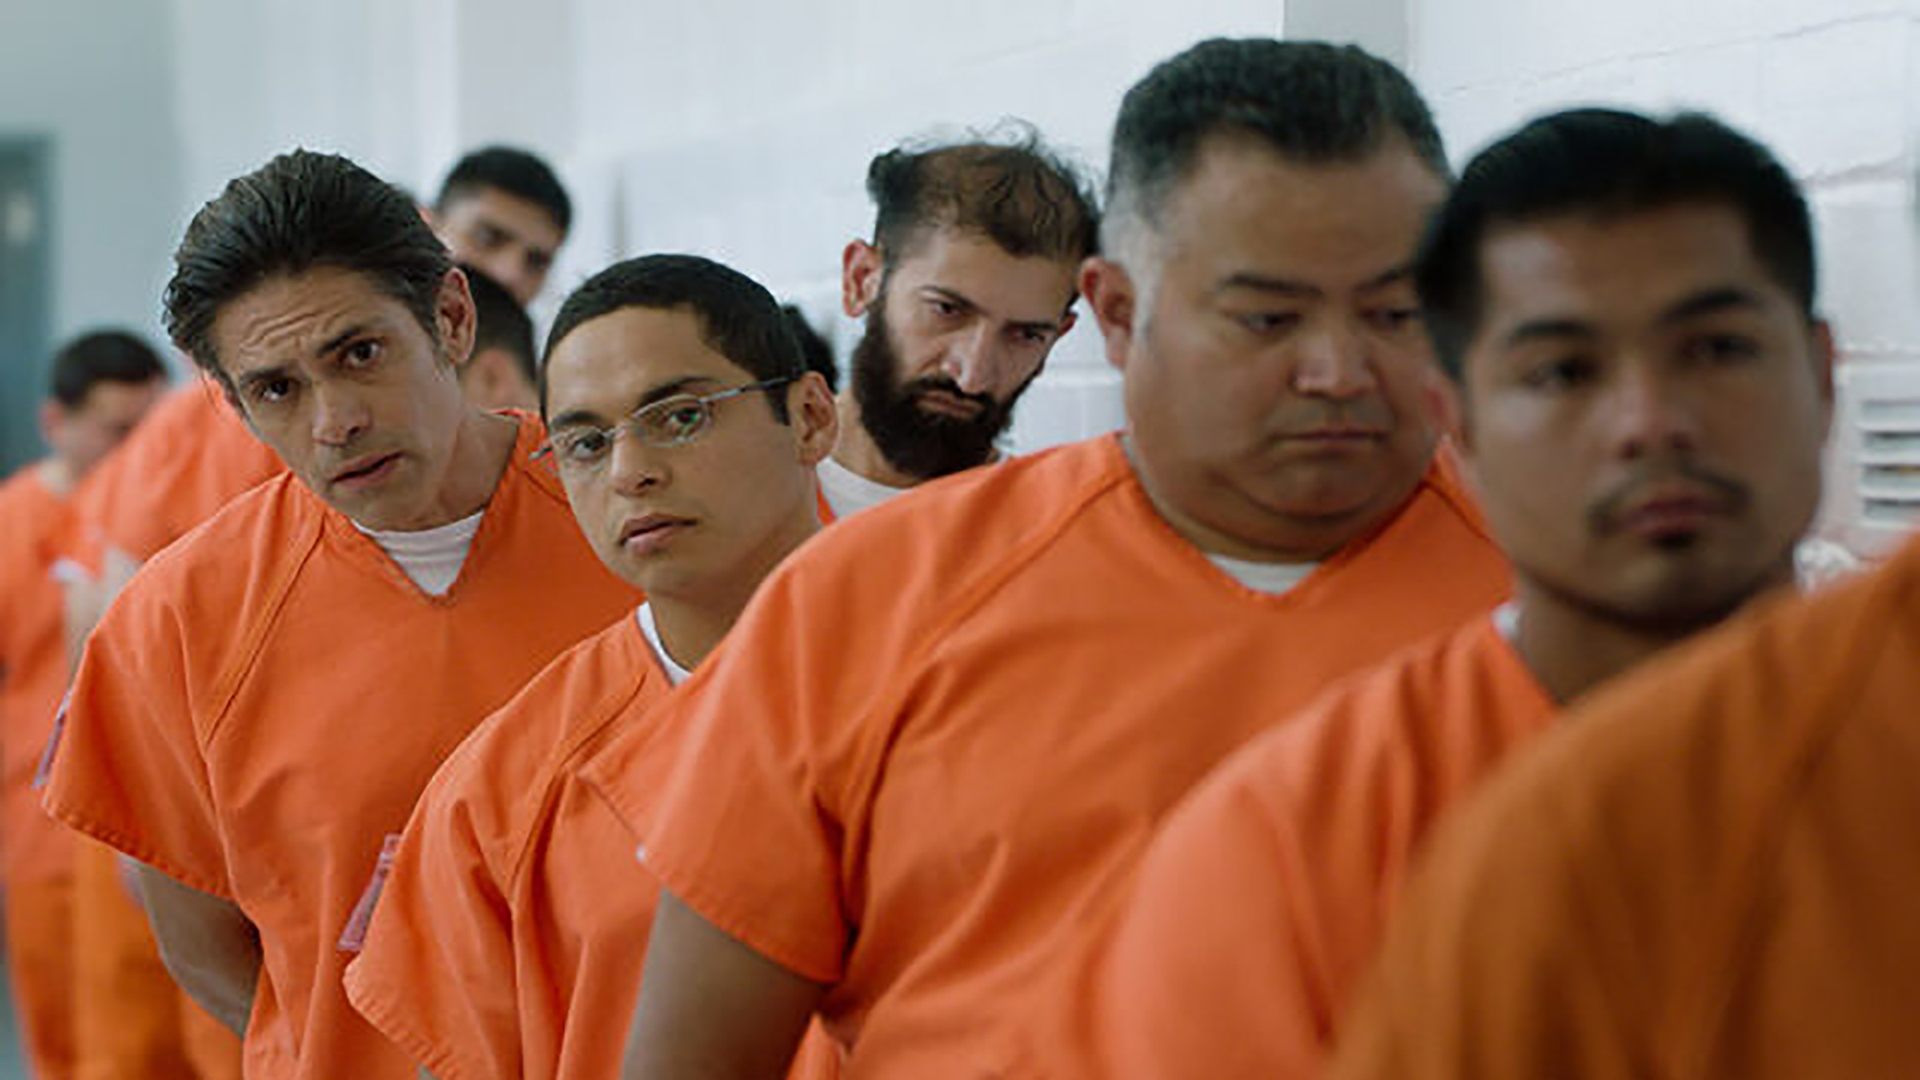 Infiltrators: People lined up in orange shirts